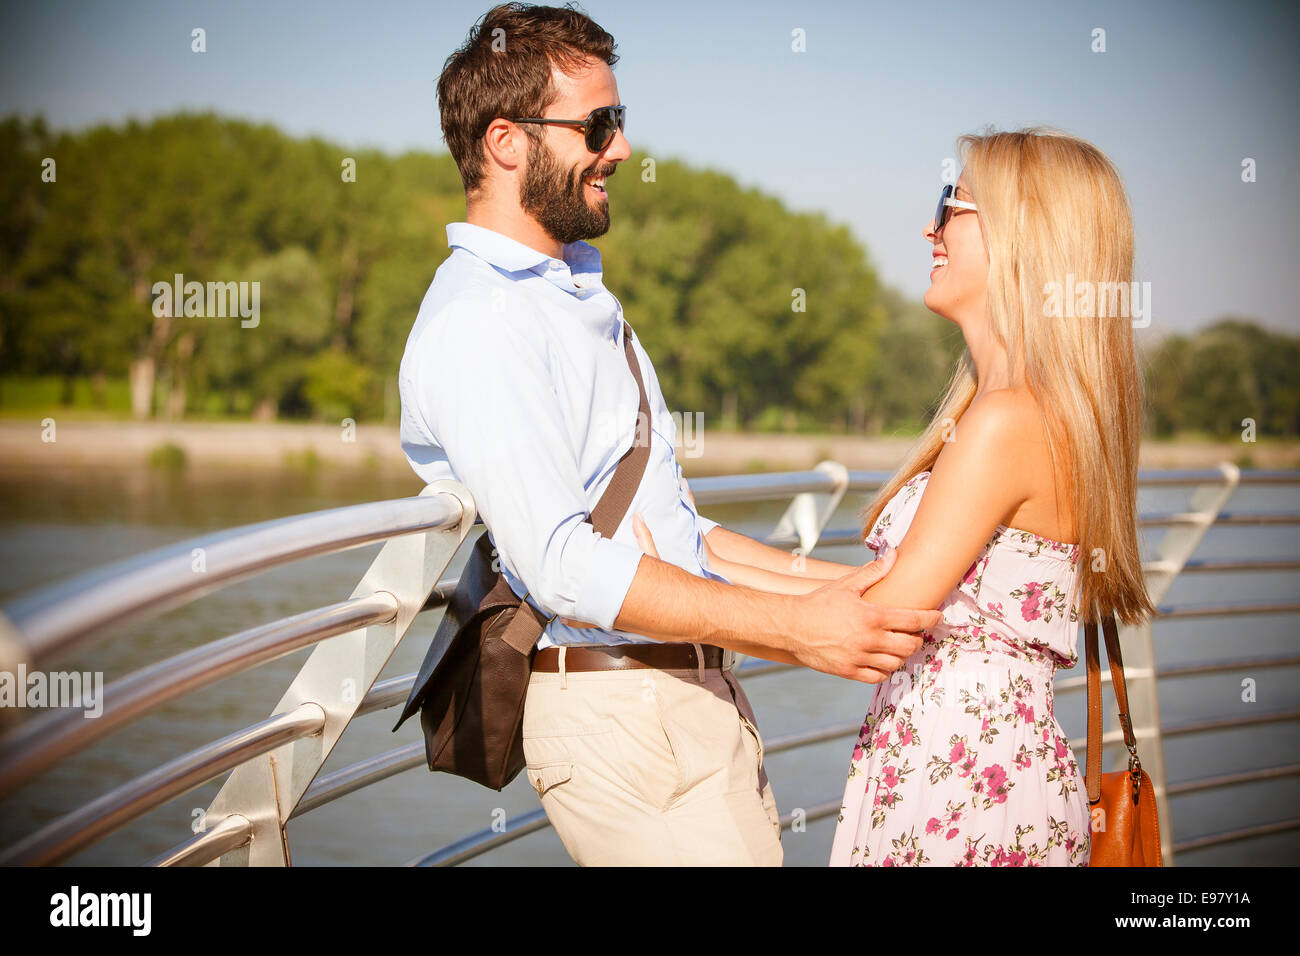 Portrait of young couple falling in love Stock Photo